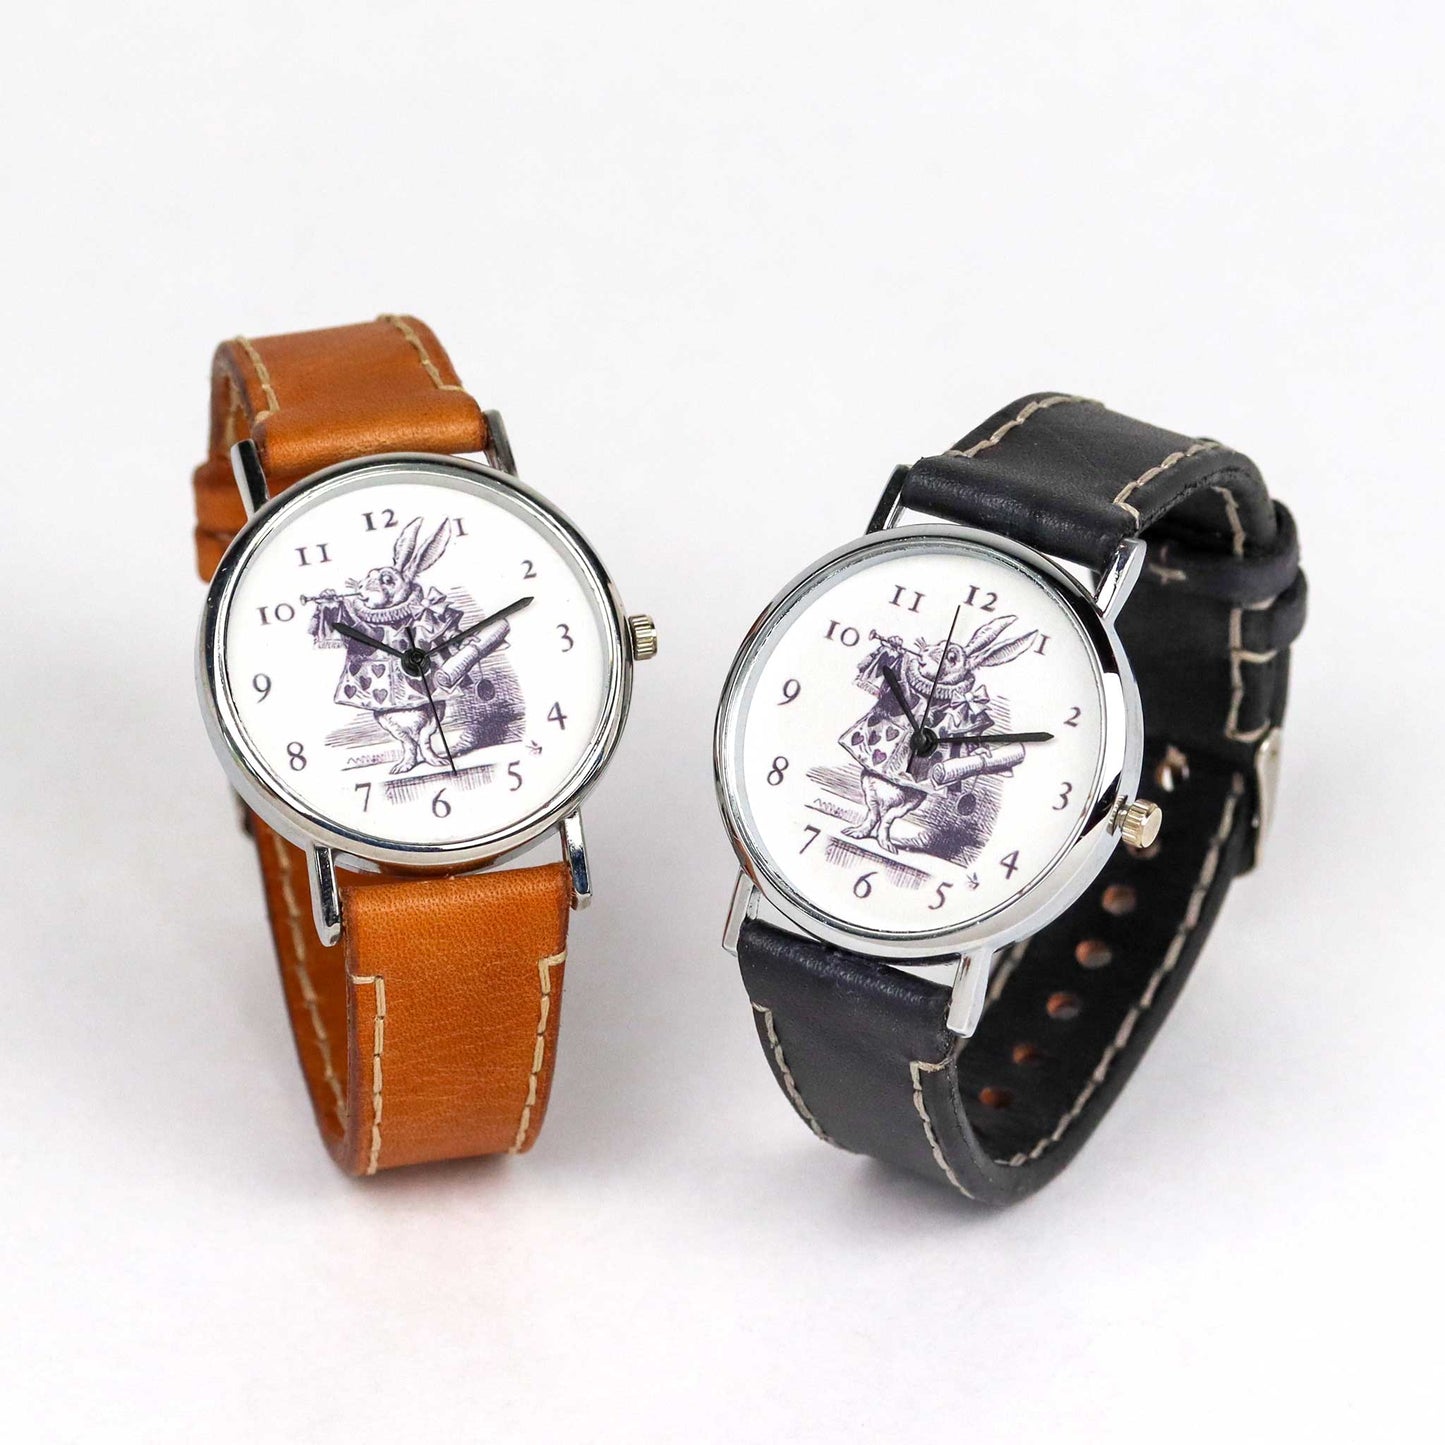 alice in wonderland themed watches with the white rabbit on the dial